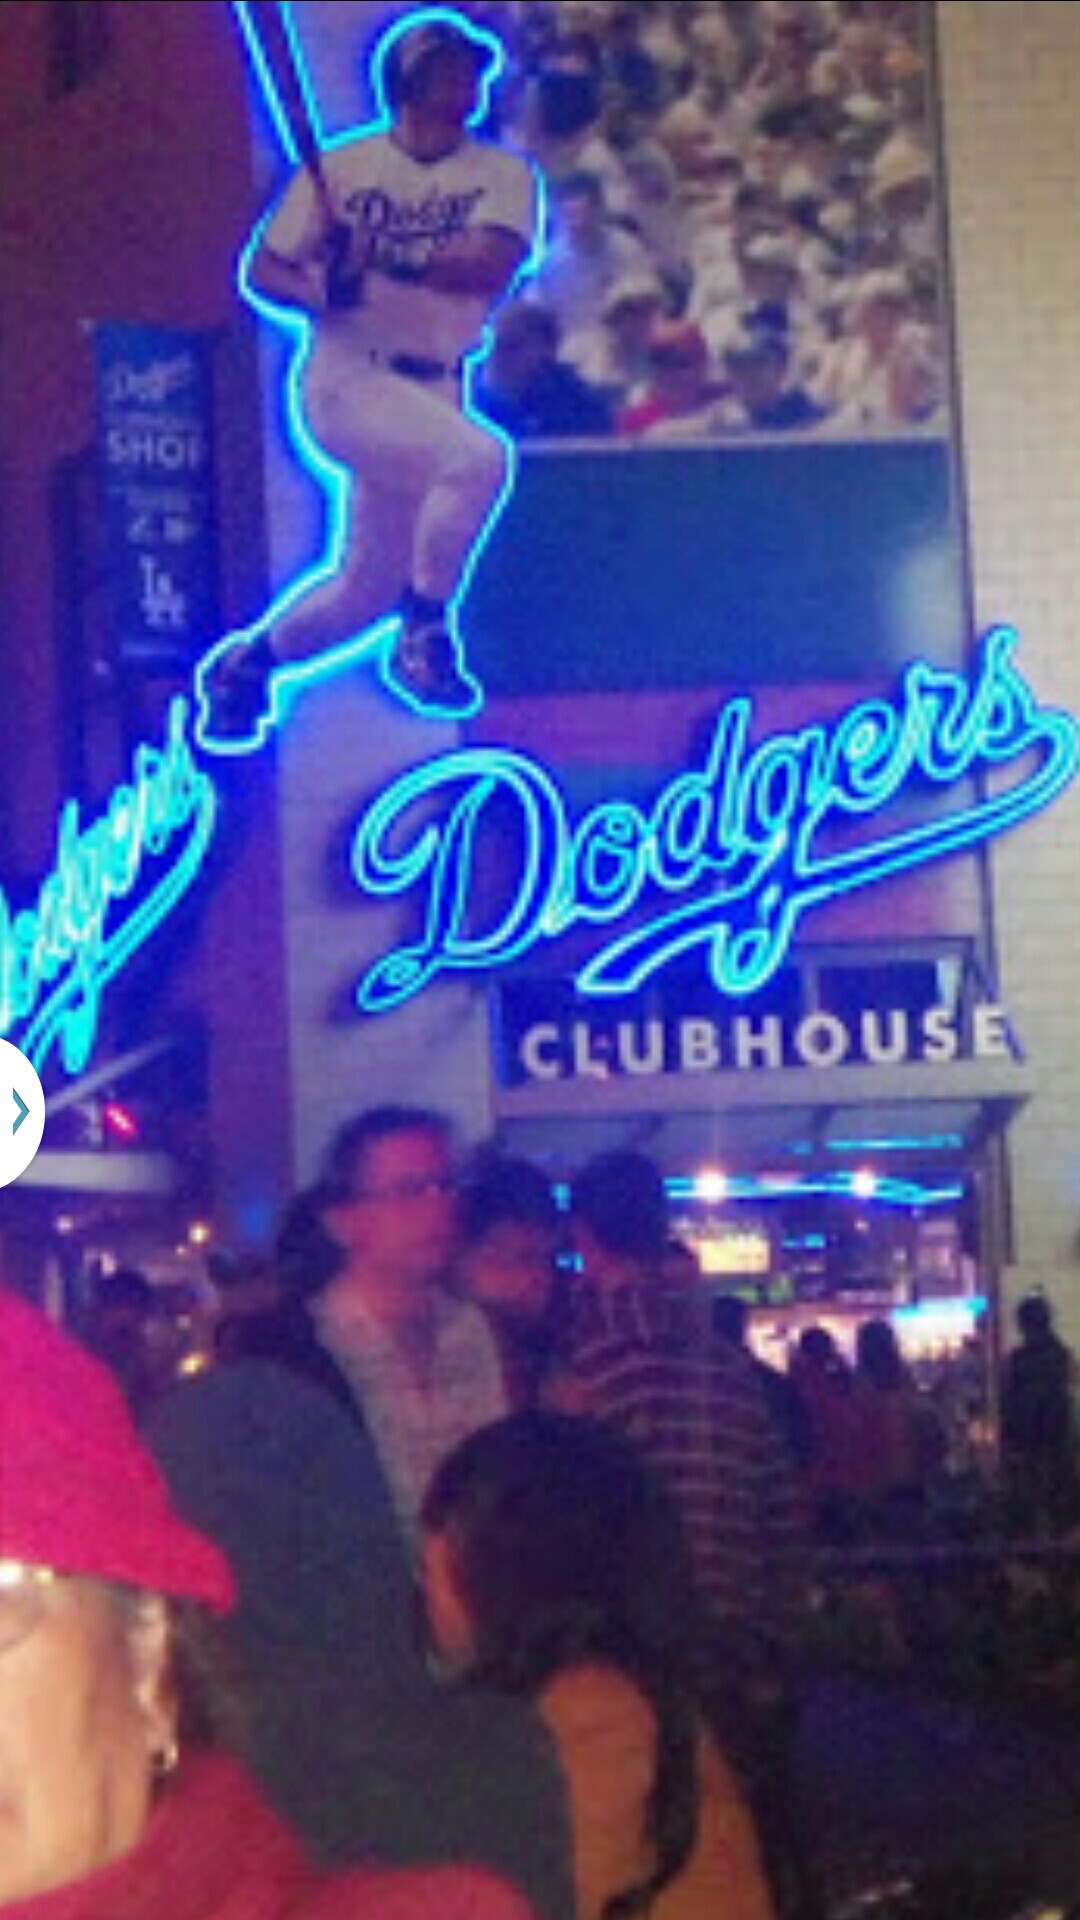 The Dodgers Clubhouse - Shops Services On Universal Citywalk Universal  City, California